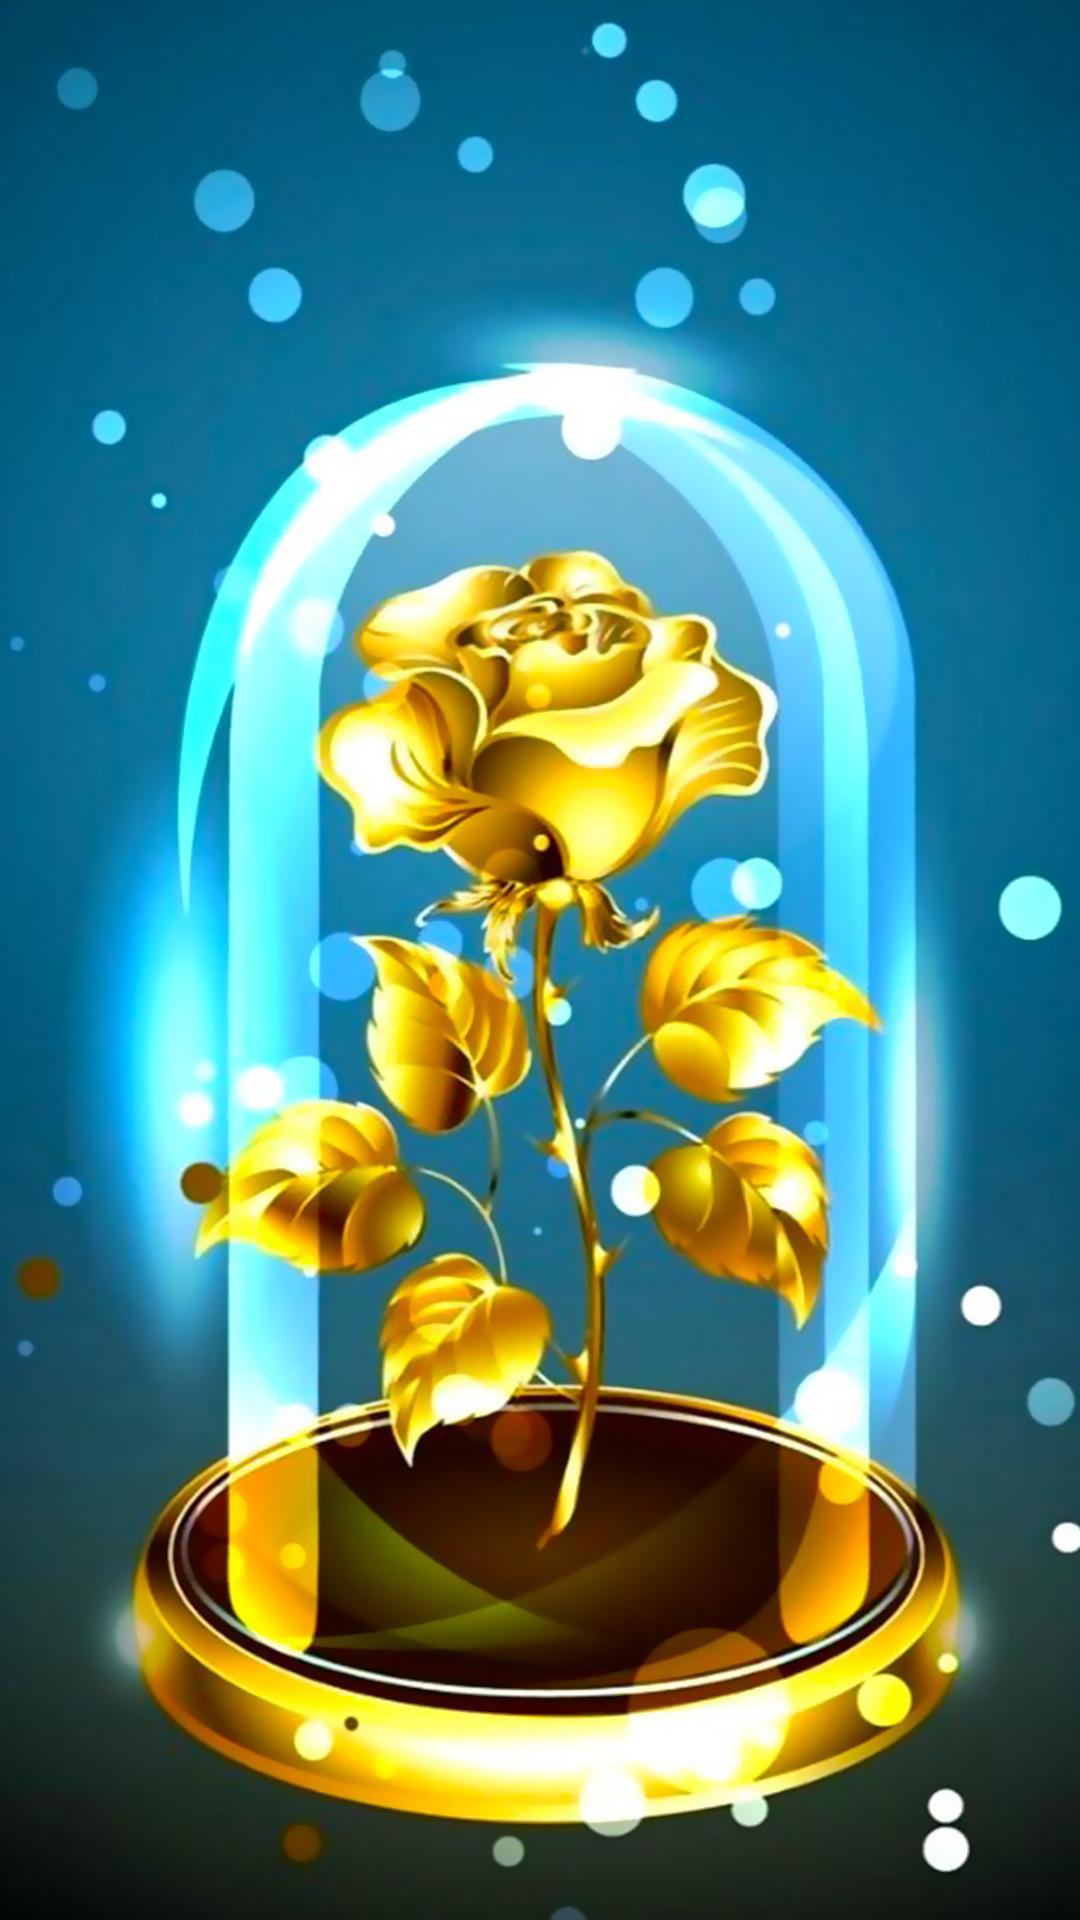 Golden Rose APUS Live Wallpaper for Android